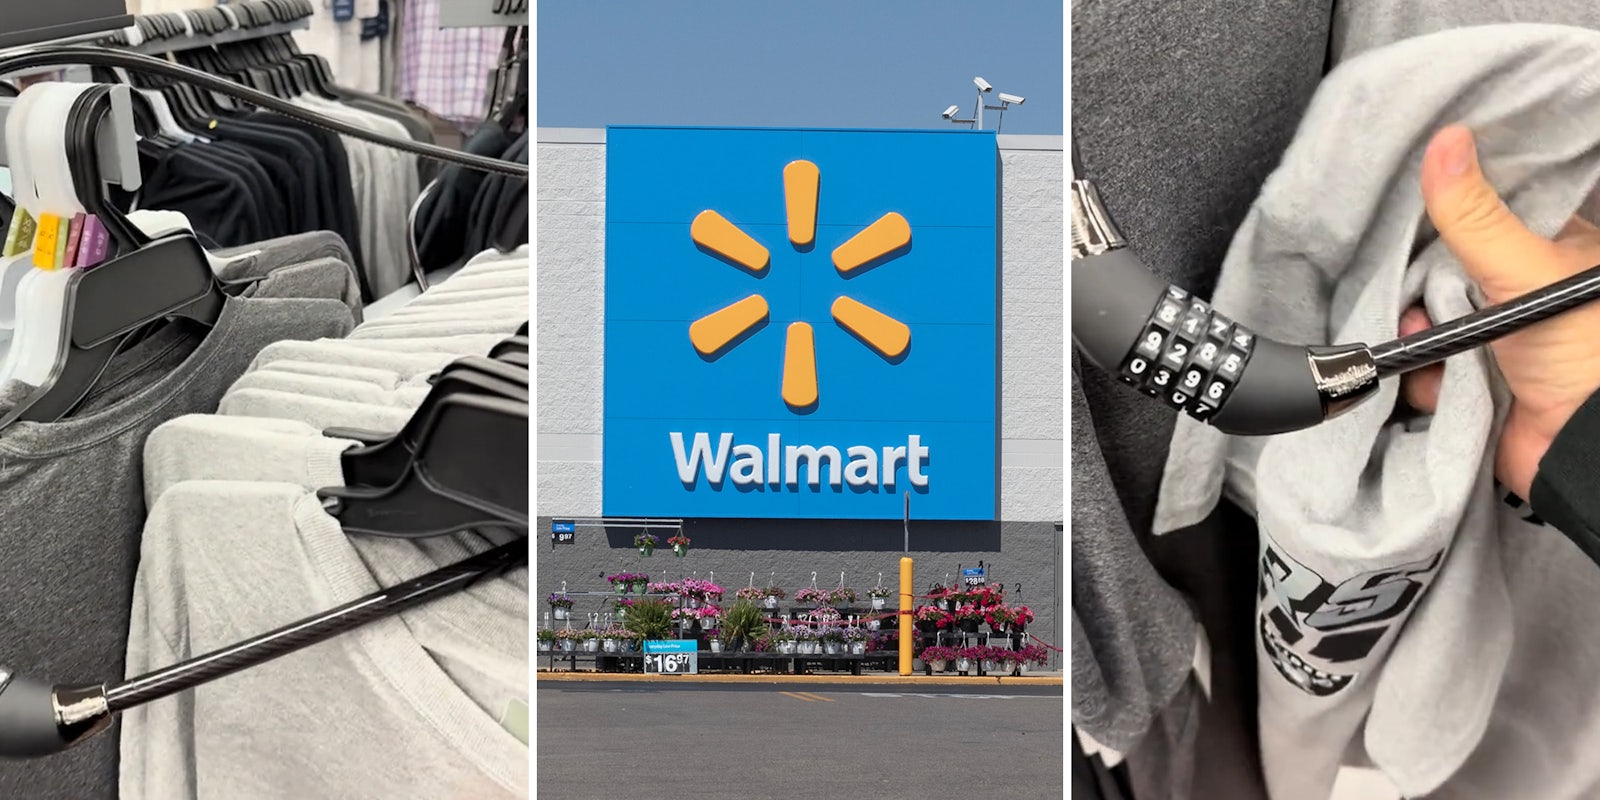 Shopper Finds Locked-up Clothes at Walmart